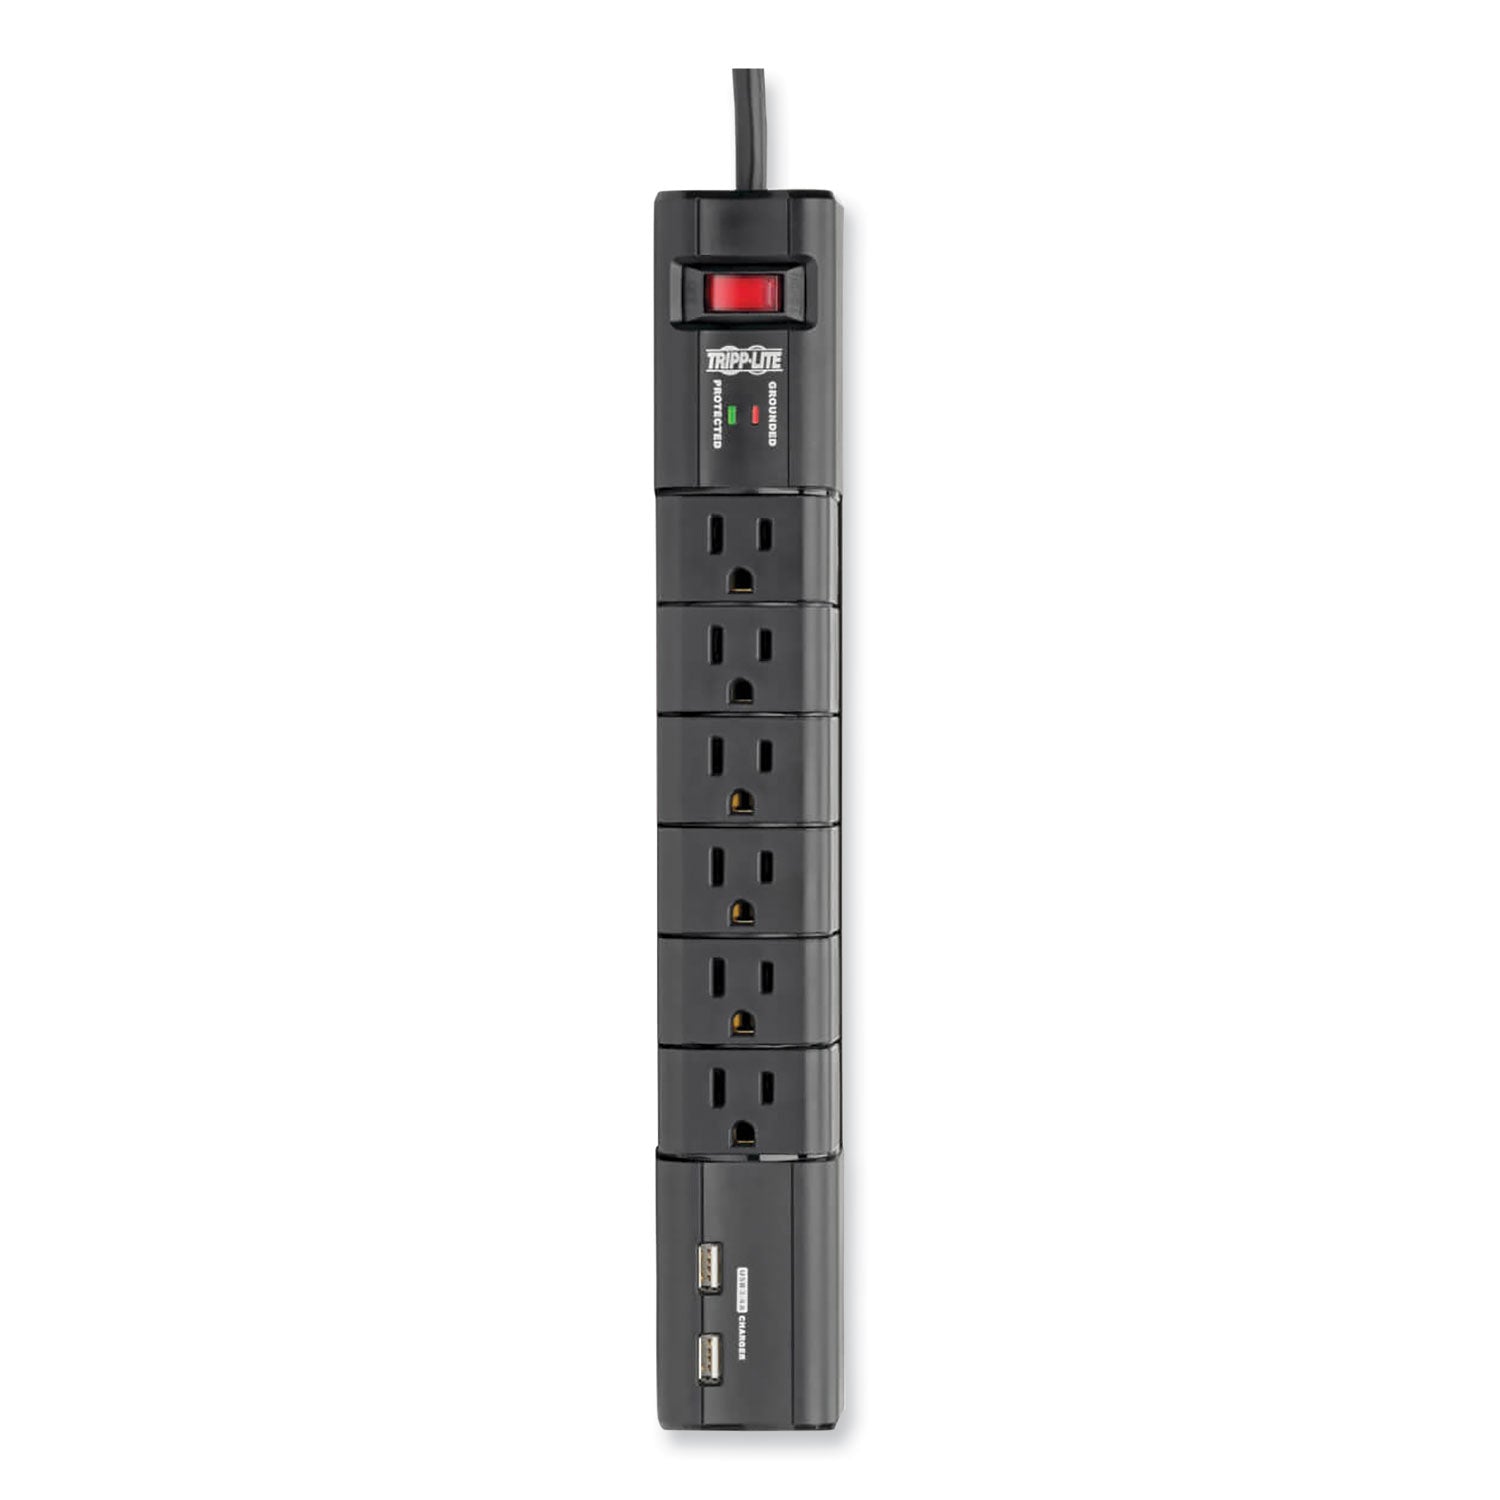 protect-it!-surge-protector-6-ac-outlets-2-usb-ports-8-ft-cord-1080-j-black_trptlp608rusbb - 5